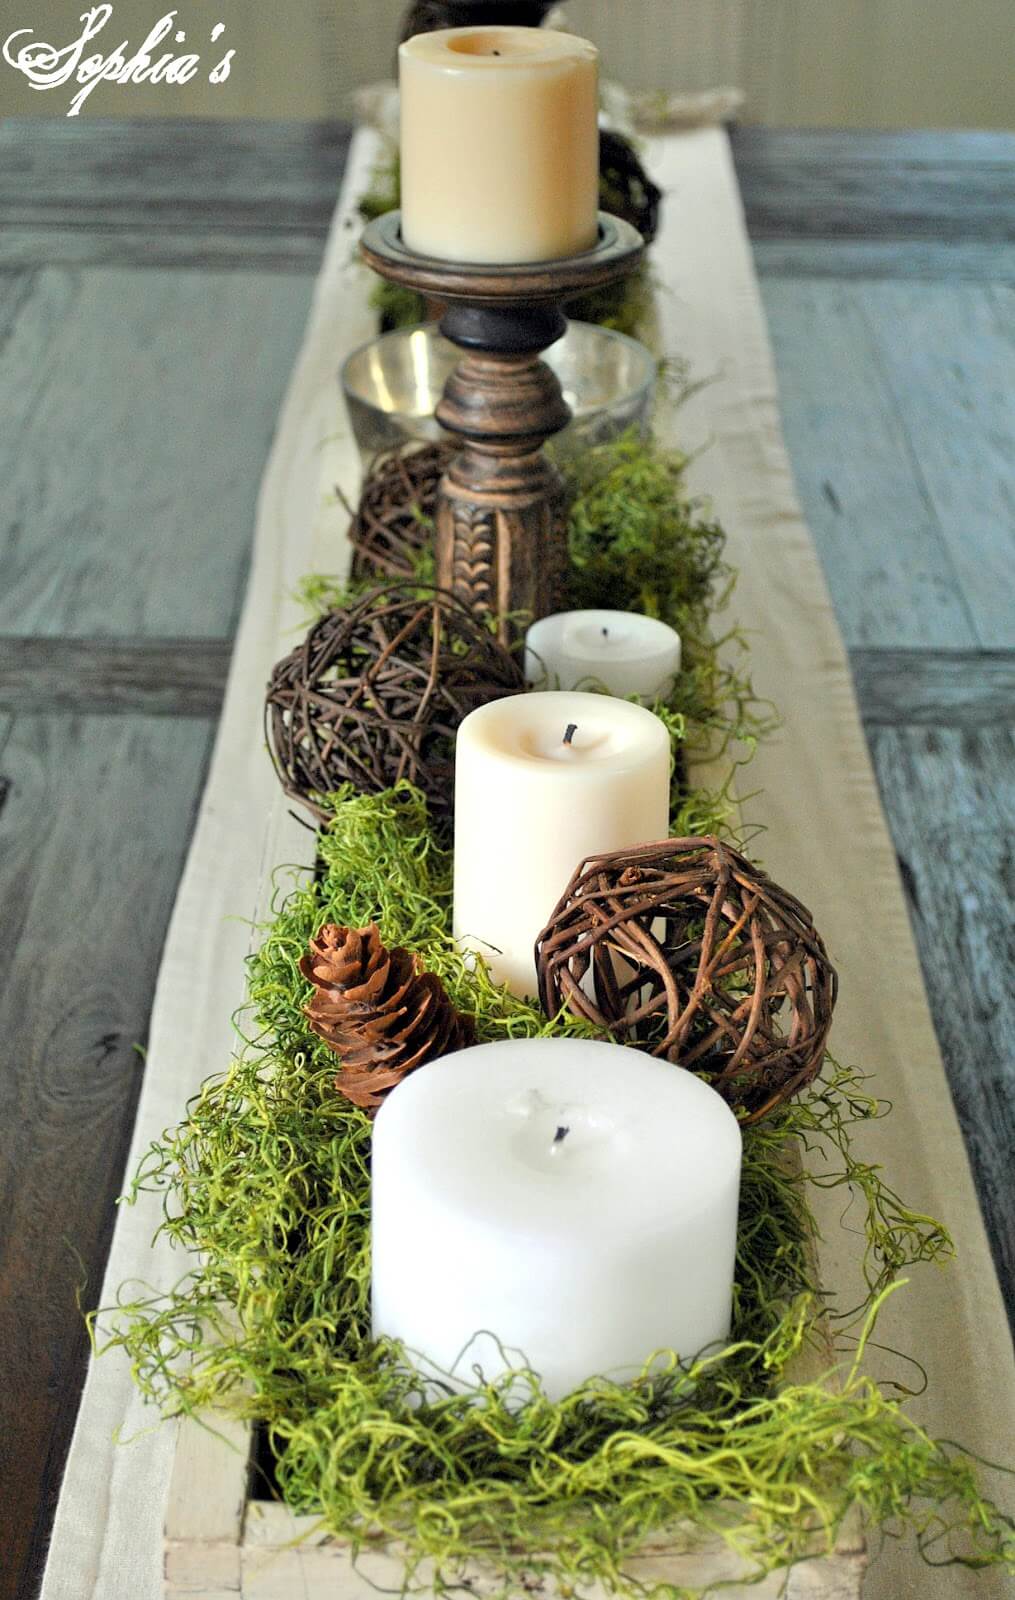 25 Best Rustic Wooden Box Centerpiece Ideas and Designs 